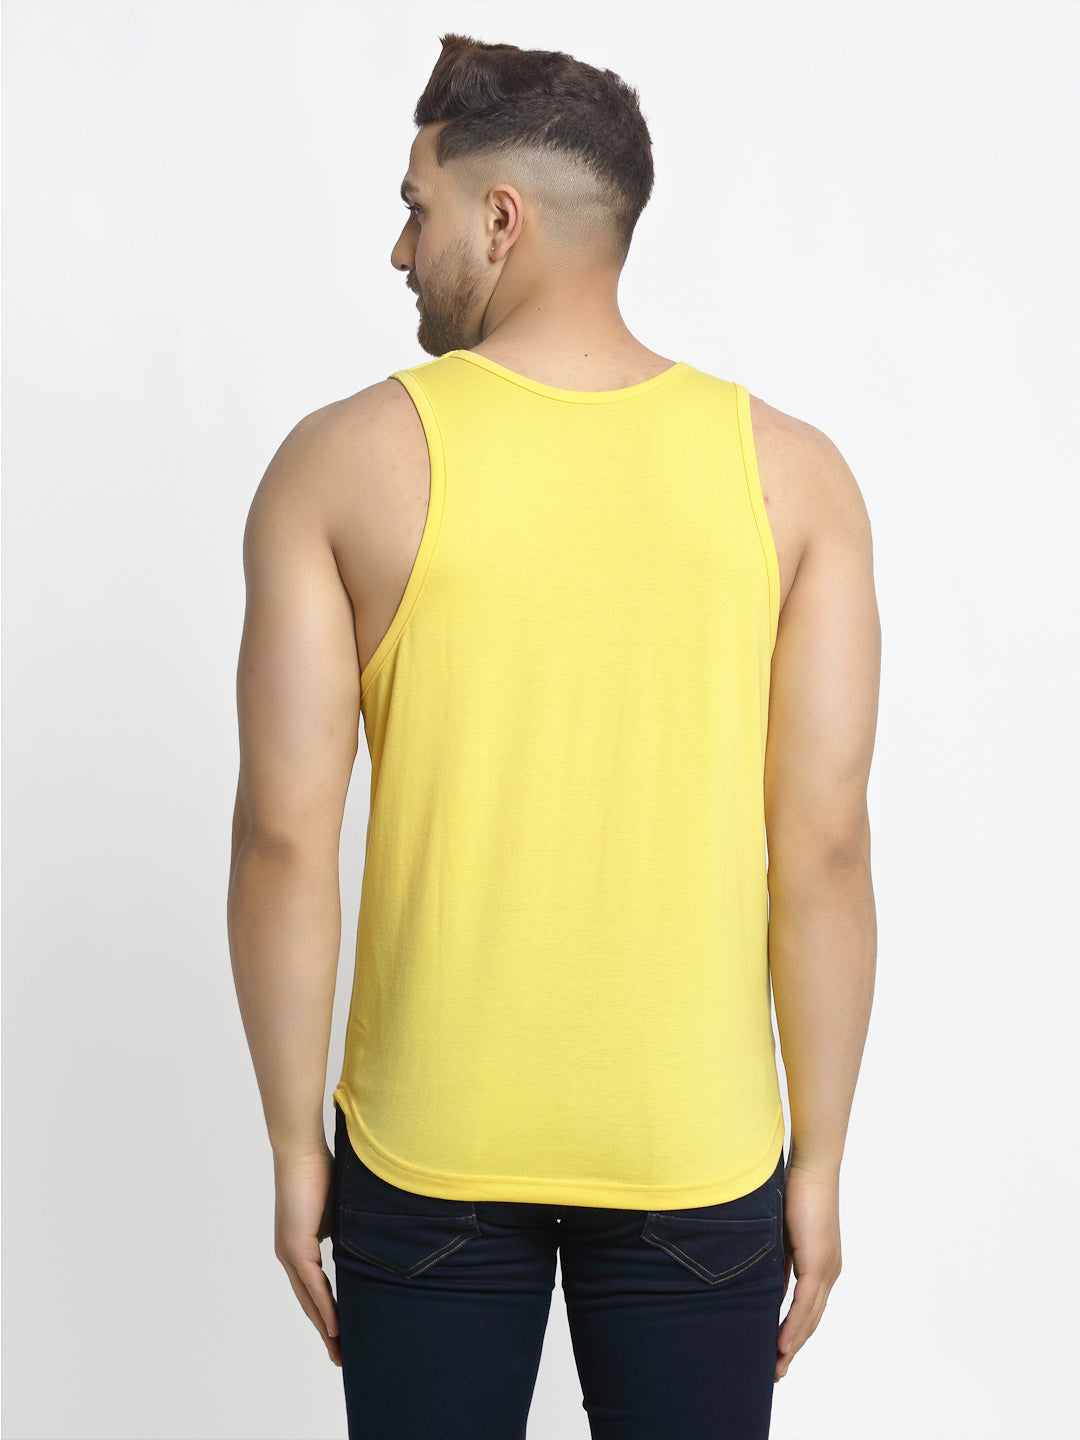 Men's Pack of 2 Olive Green & Yellow Printed Gym vest - Friskers